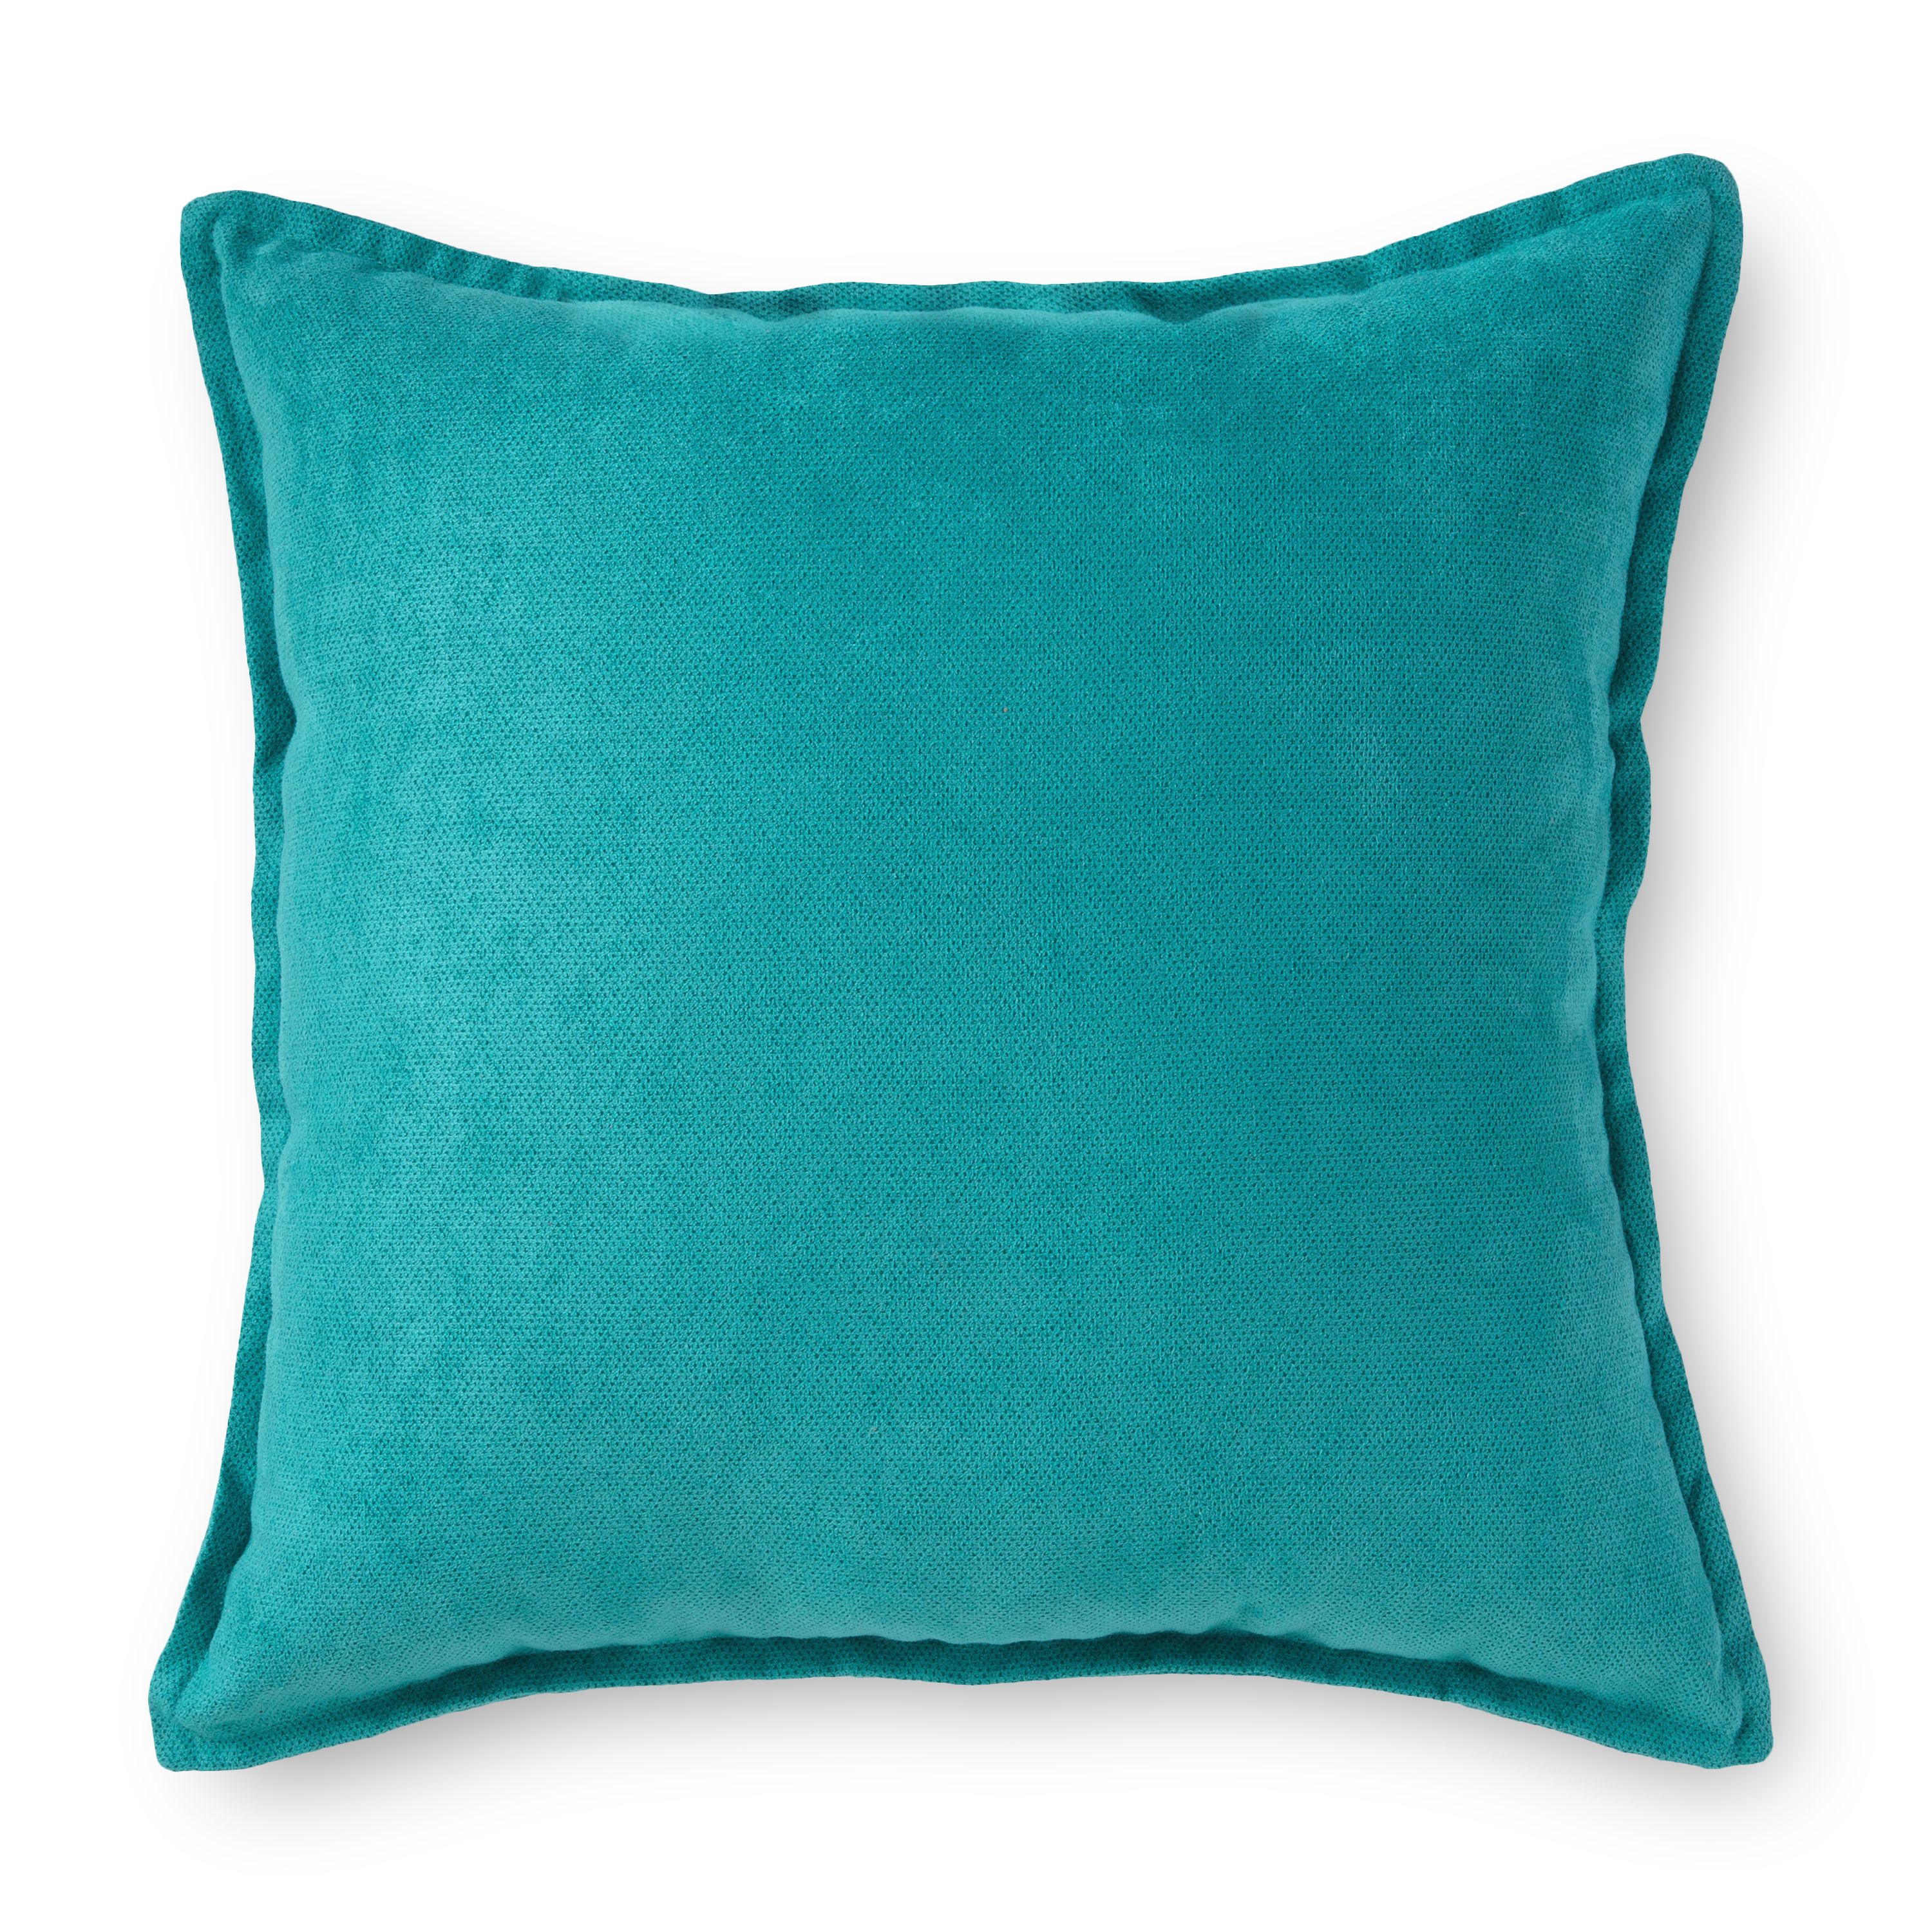 Mainstays Faux Suede Decorative Square Throw Pillow with Flange, 18" x 18", Peacock - image 1 of 4